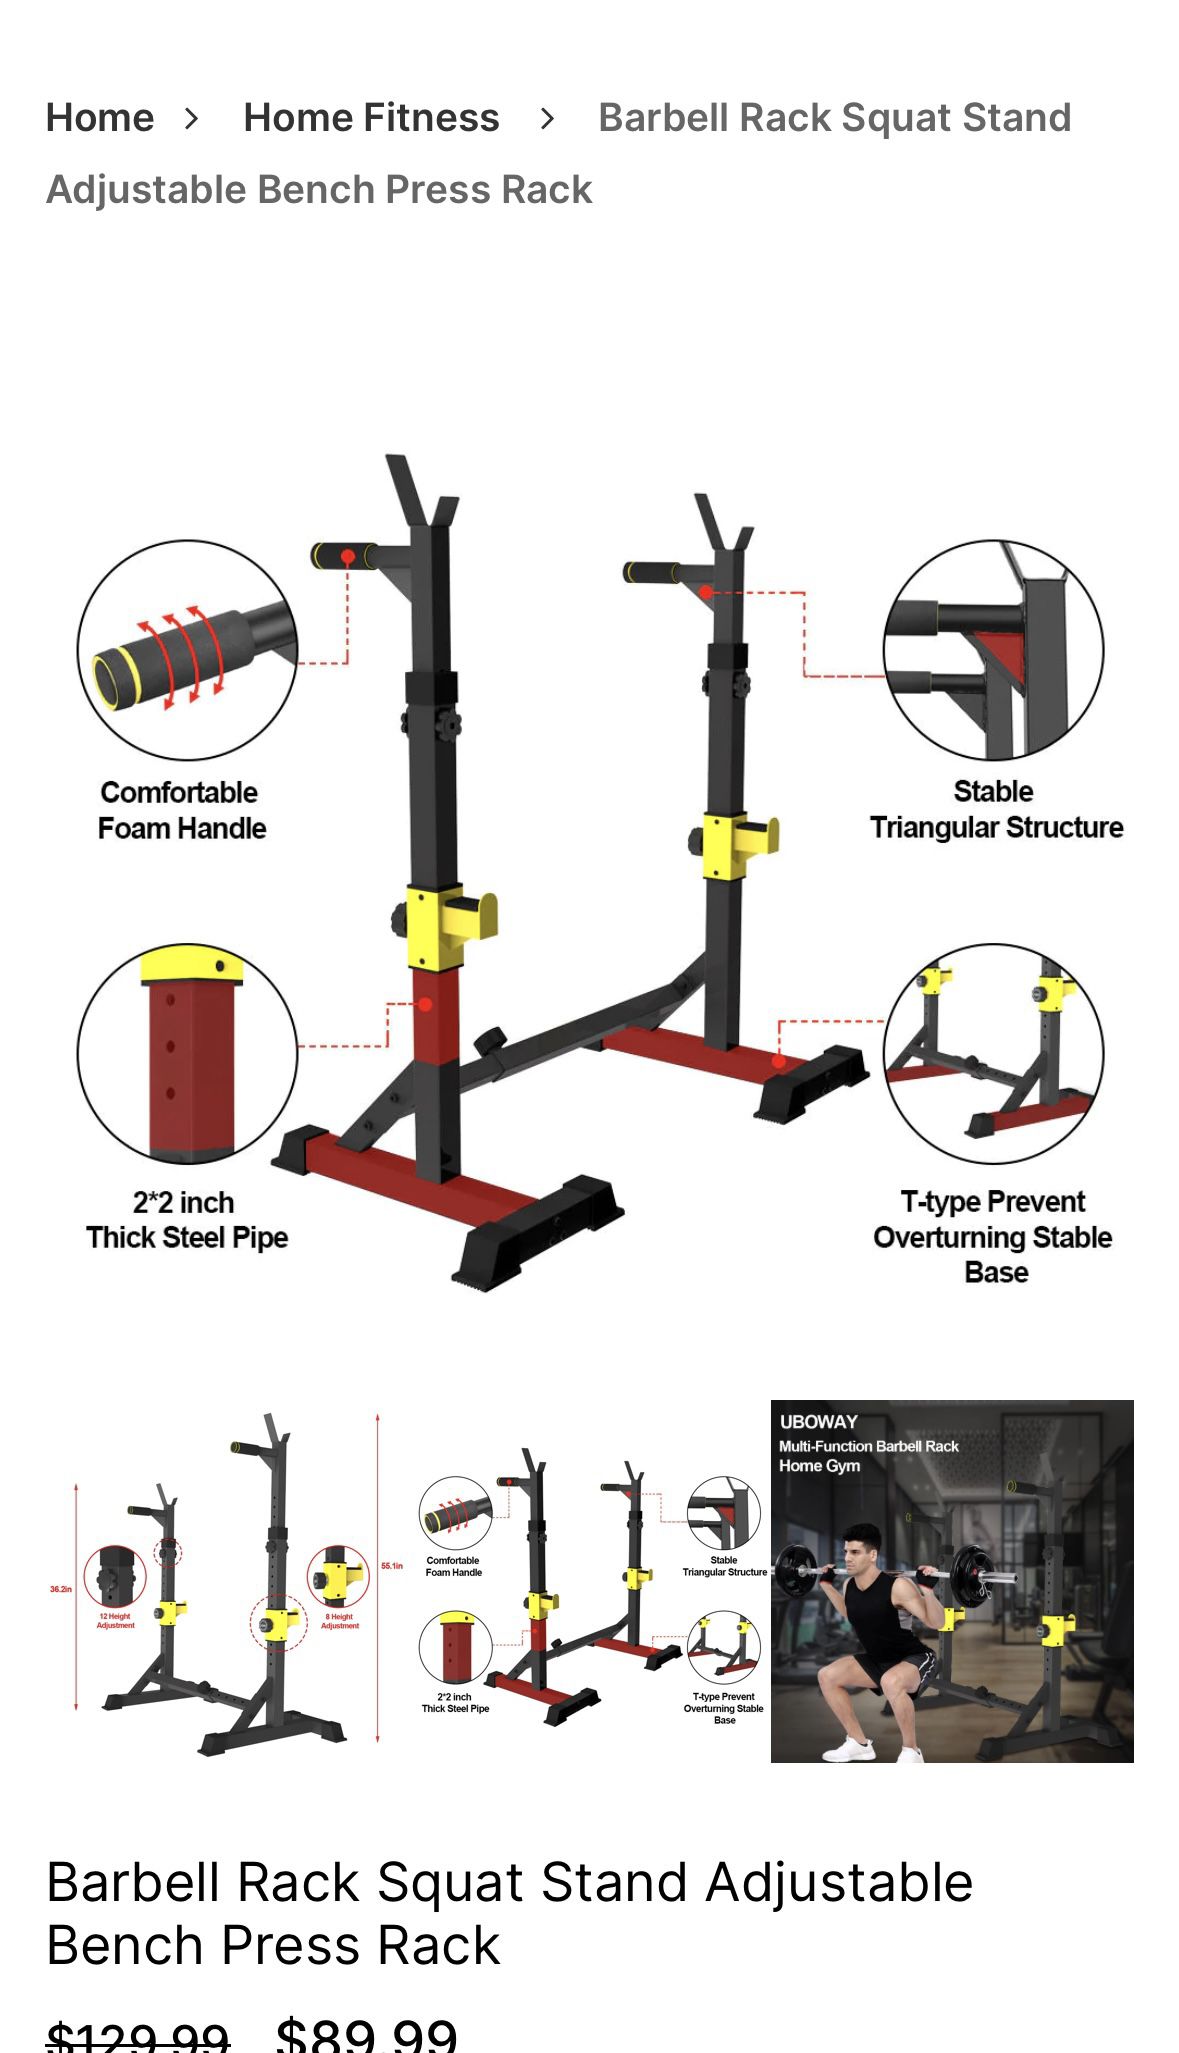 Bench Press Rack 550LBS Max Load Multi-Function Weight Lifting Home Gym